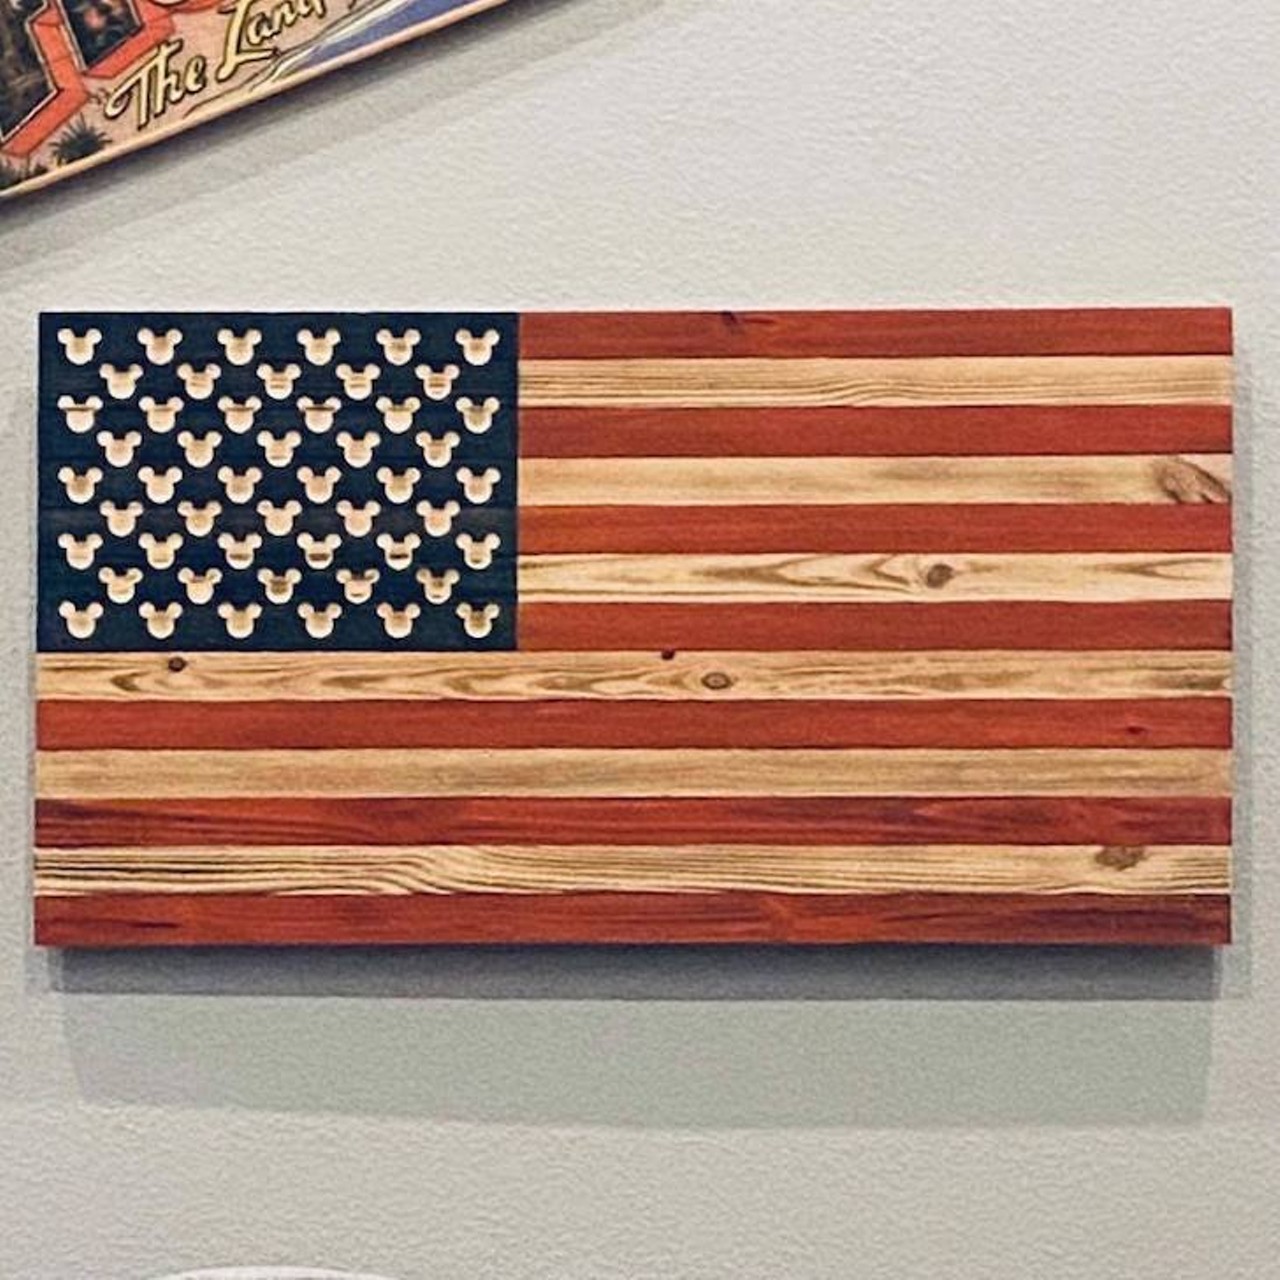 It Started With A Flag   Mark Newman was a cast member for 23 years before being laid off in September. Now, he makes beautiful, handcrafted wooden American flags in his shop.